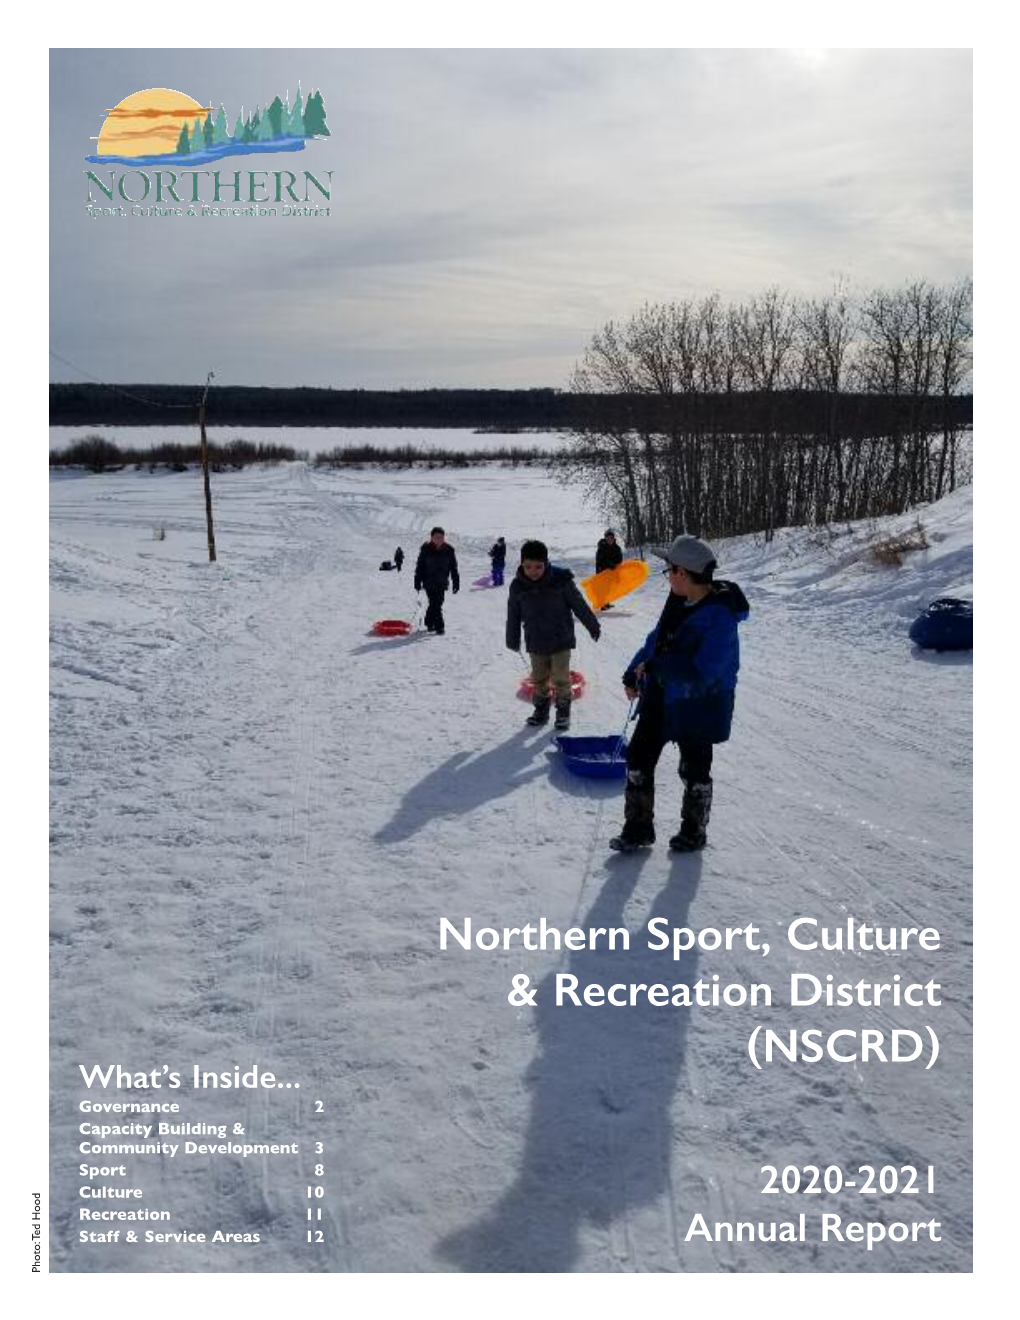 Northern Sport, Culture & Recreation District